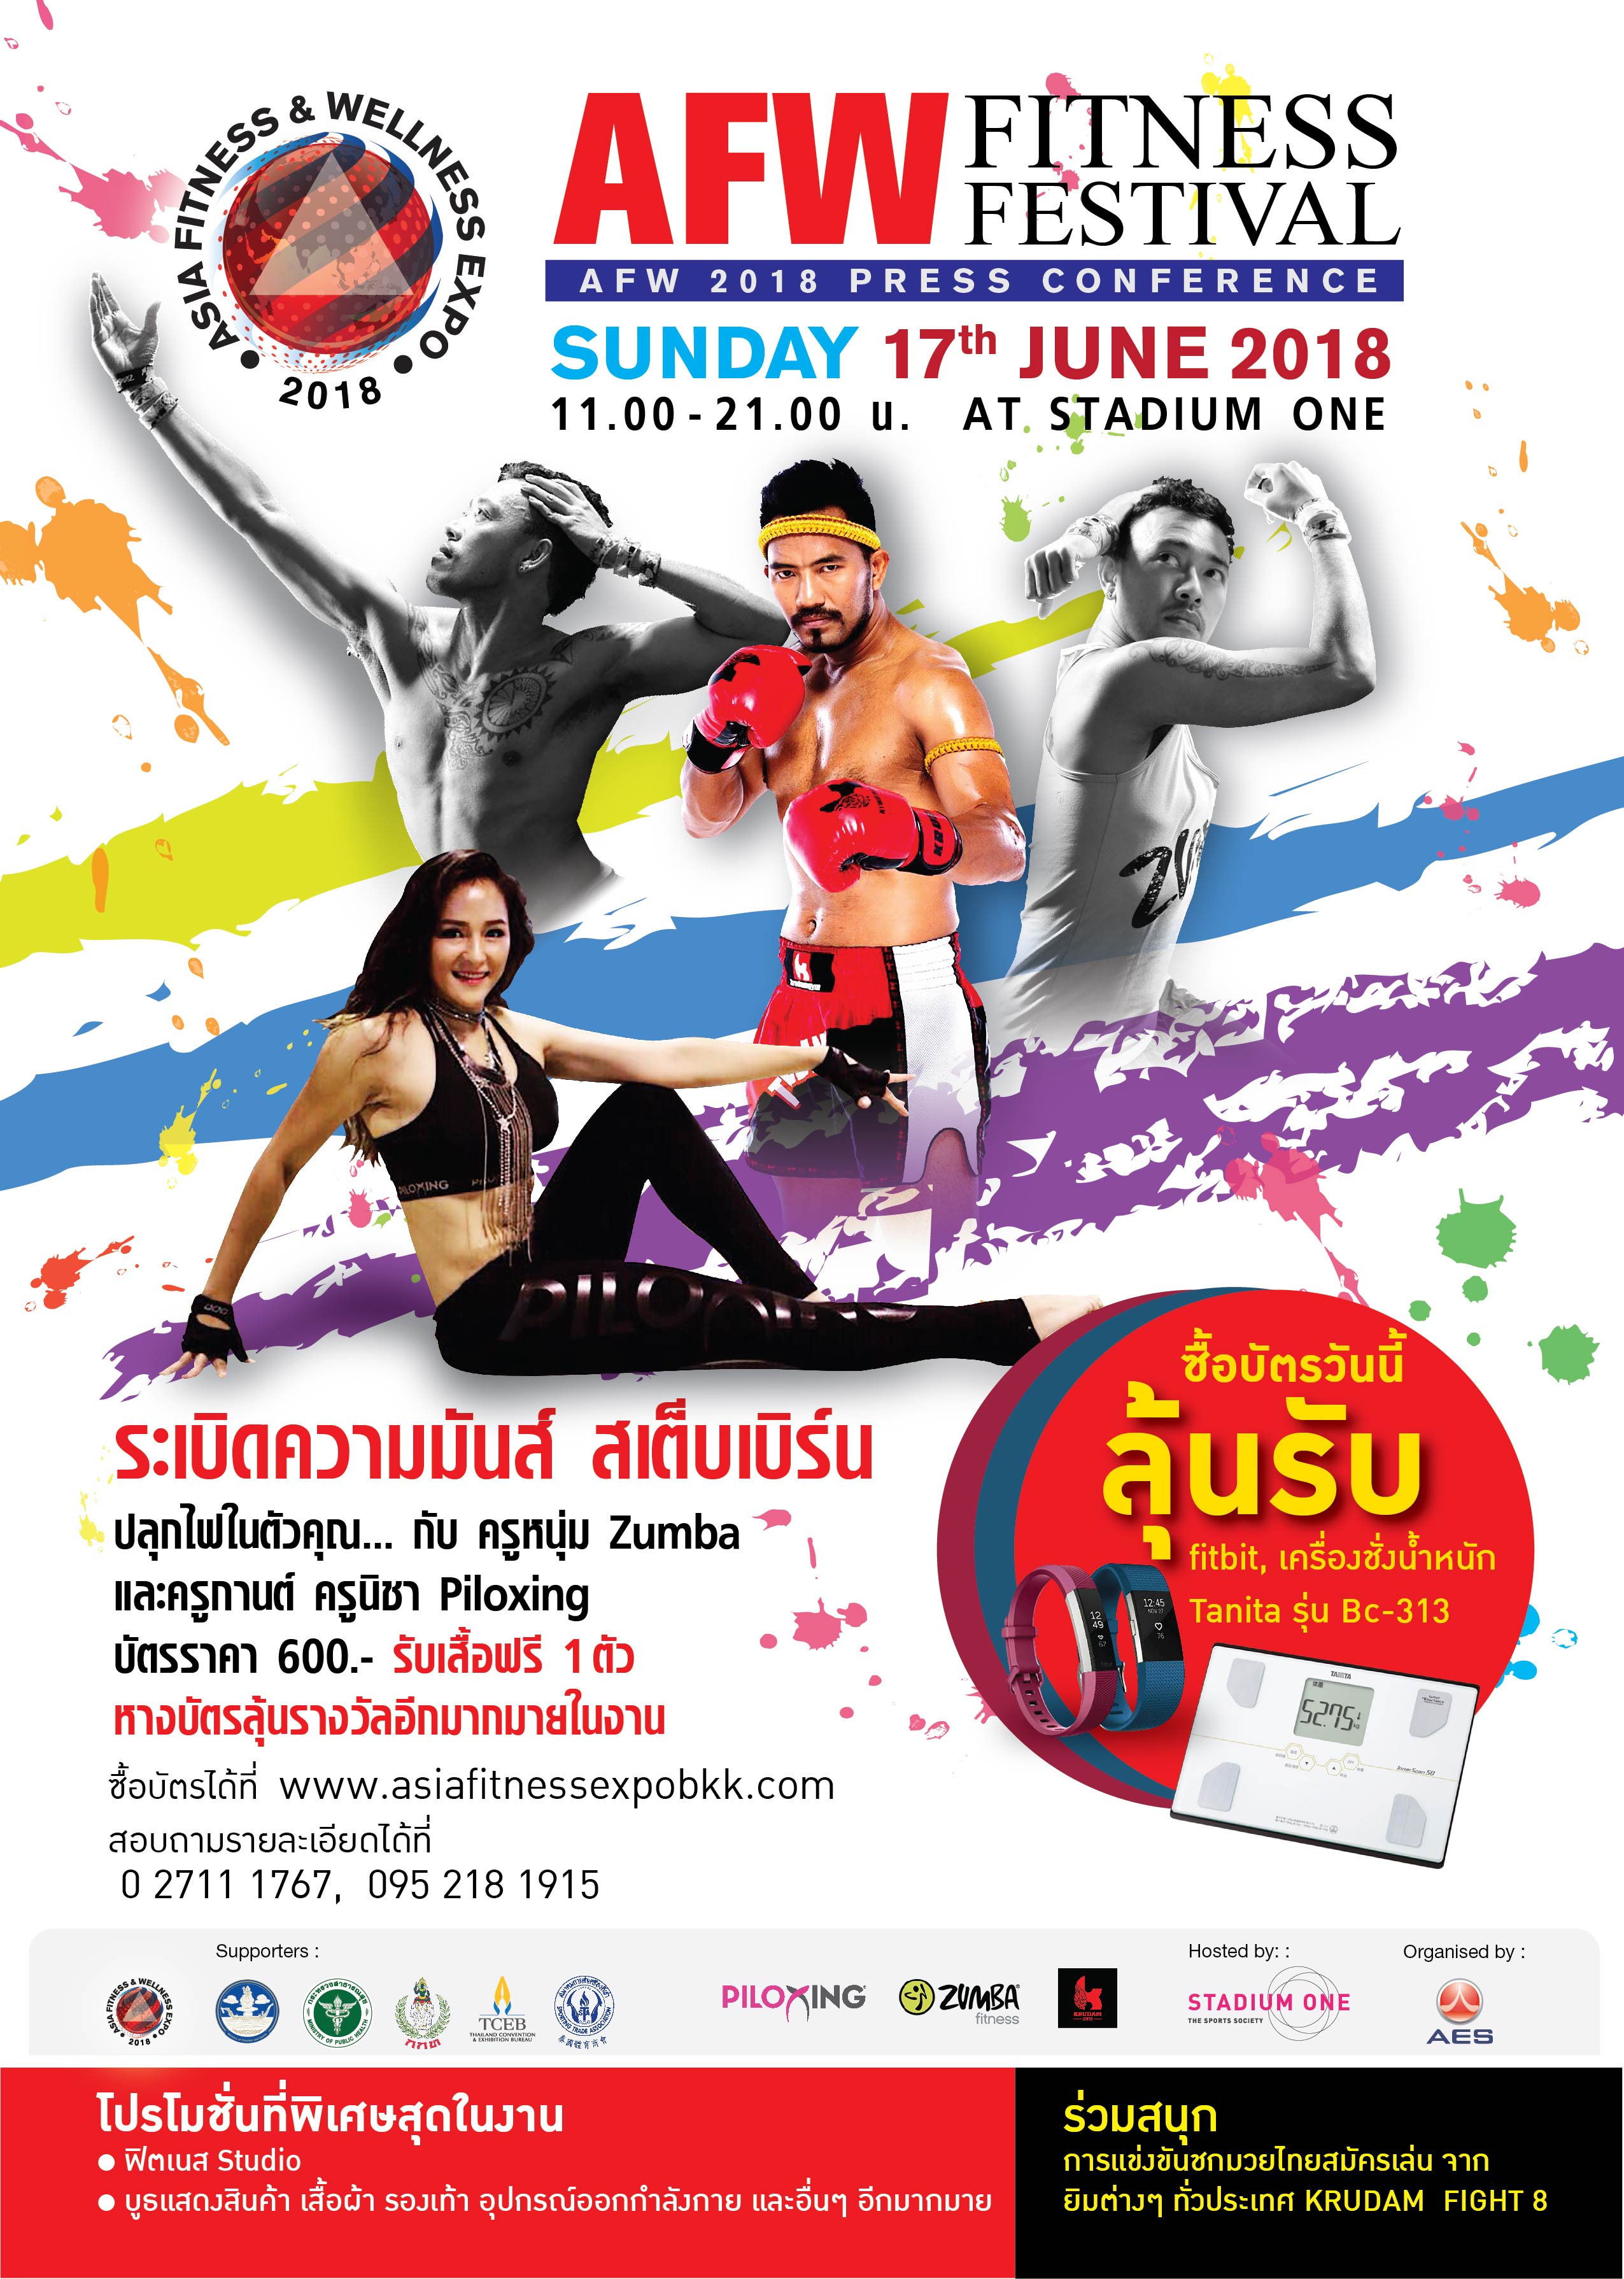 ASIA FITNESS & WELLNESS EXPO 2018 (AFW)